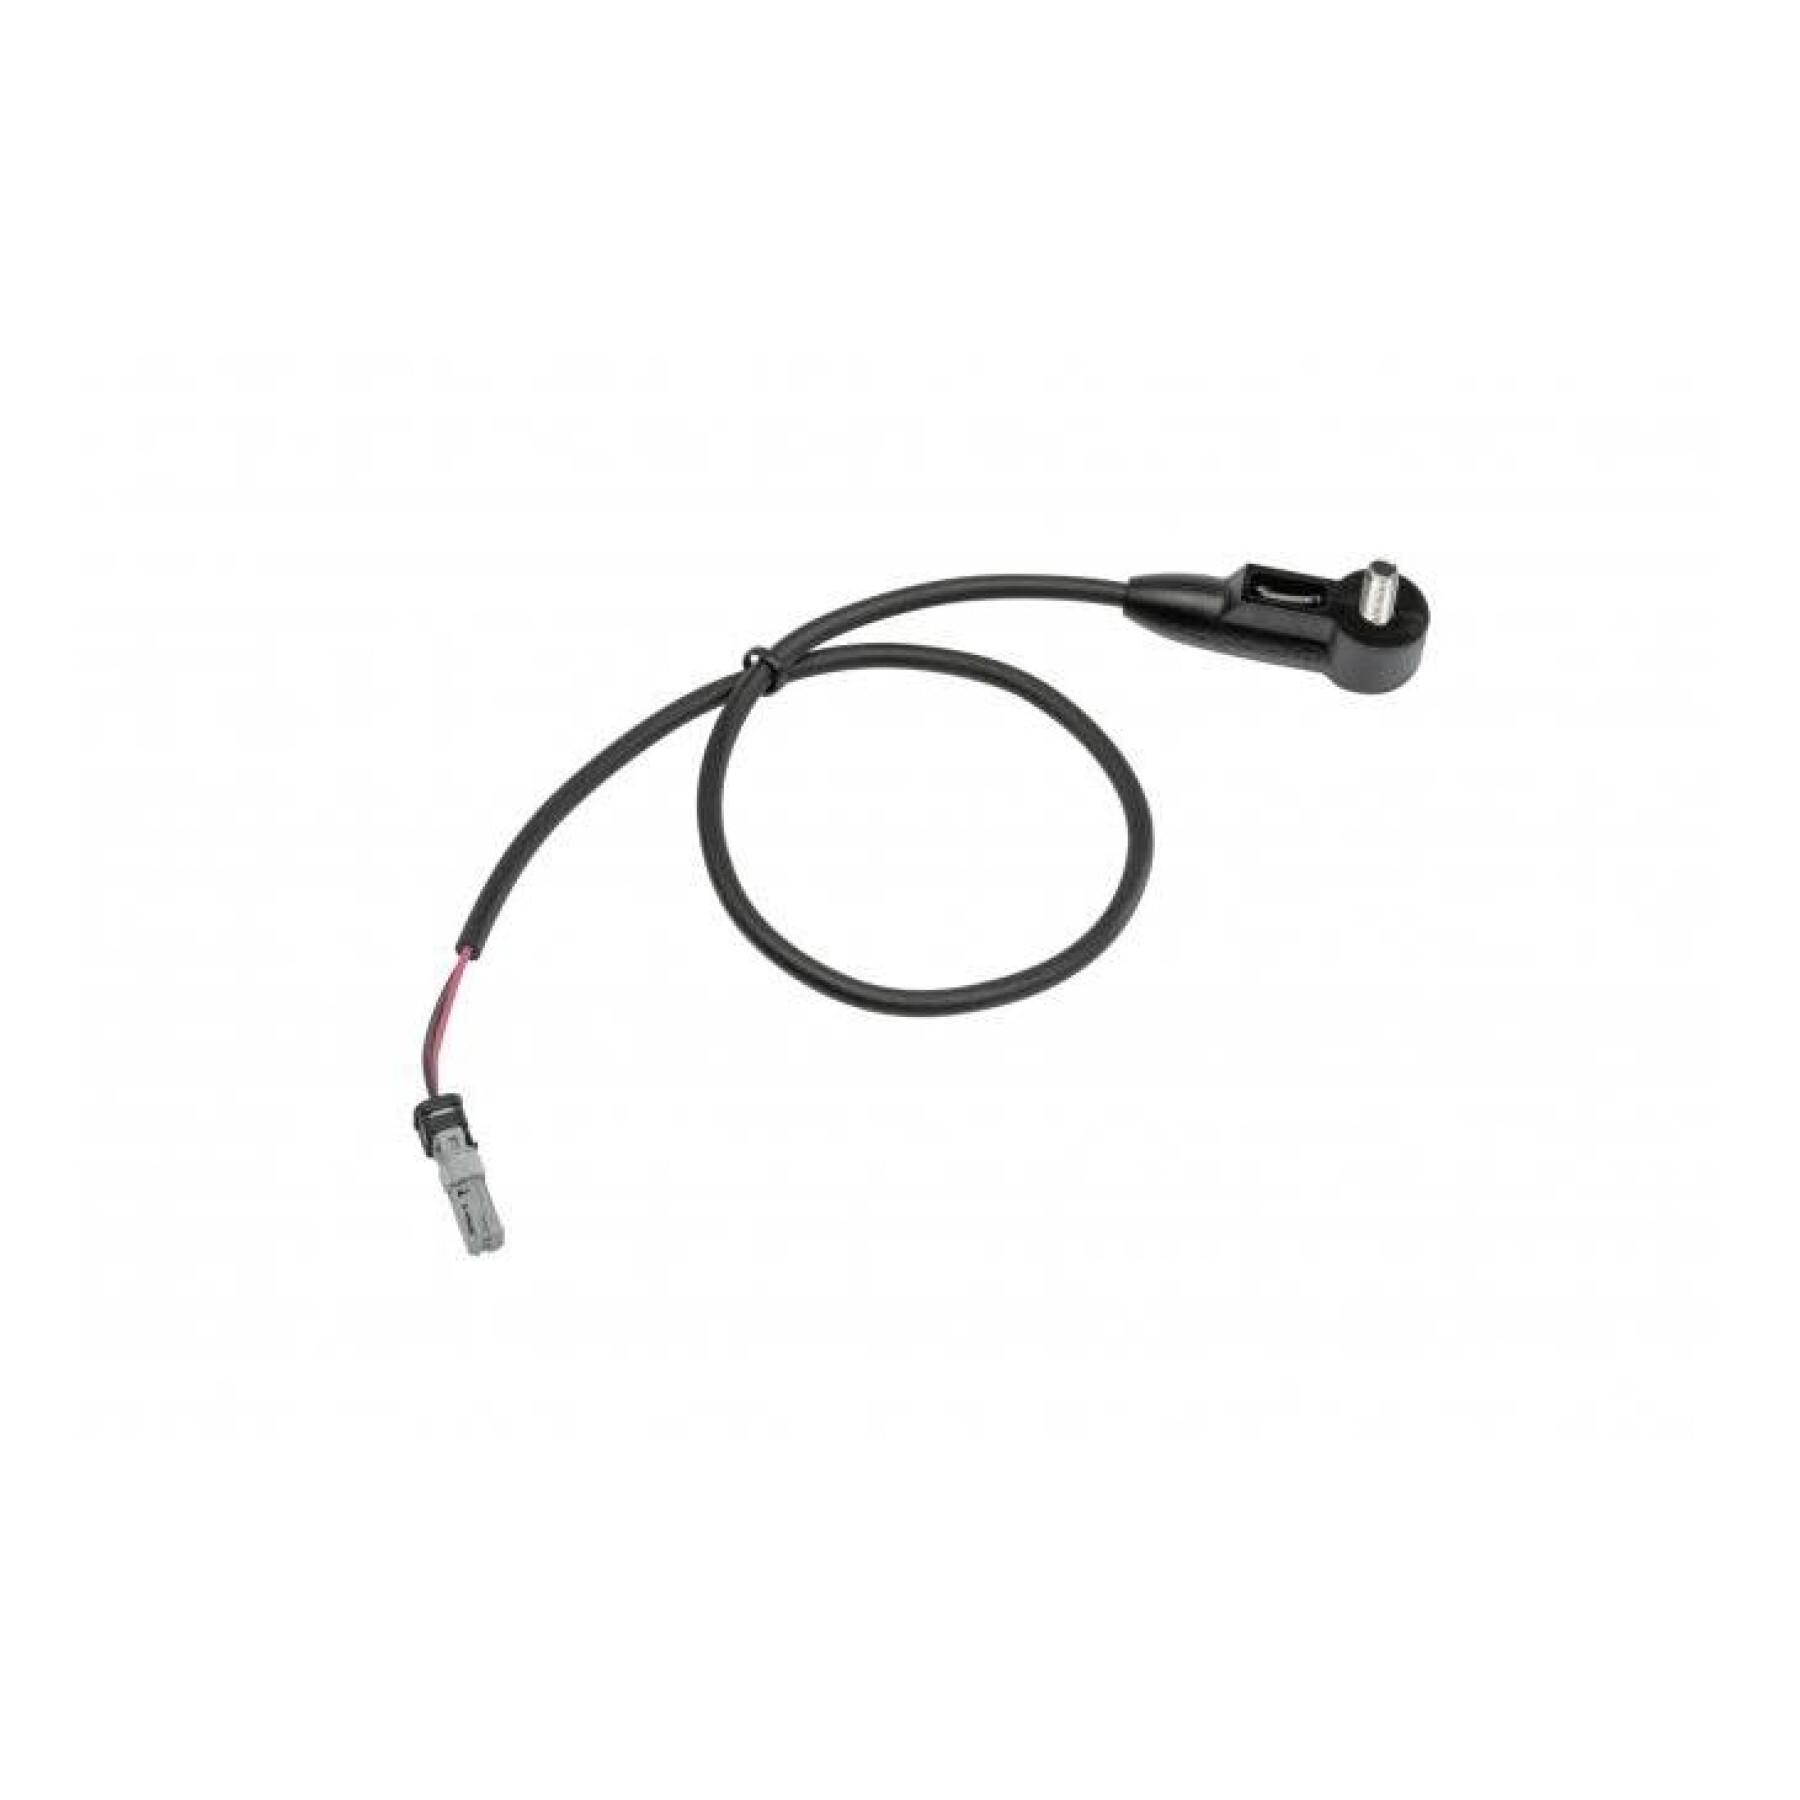 Speed cable with cable and connector compatible any model unite Bosch